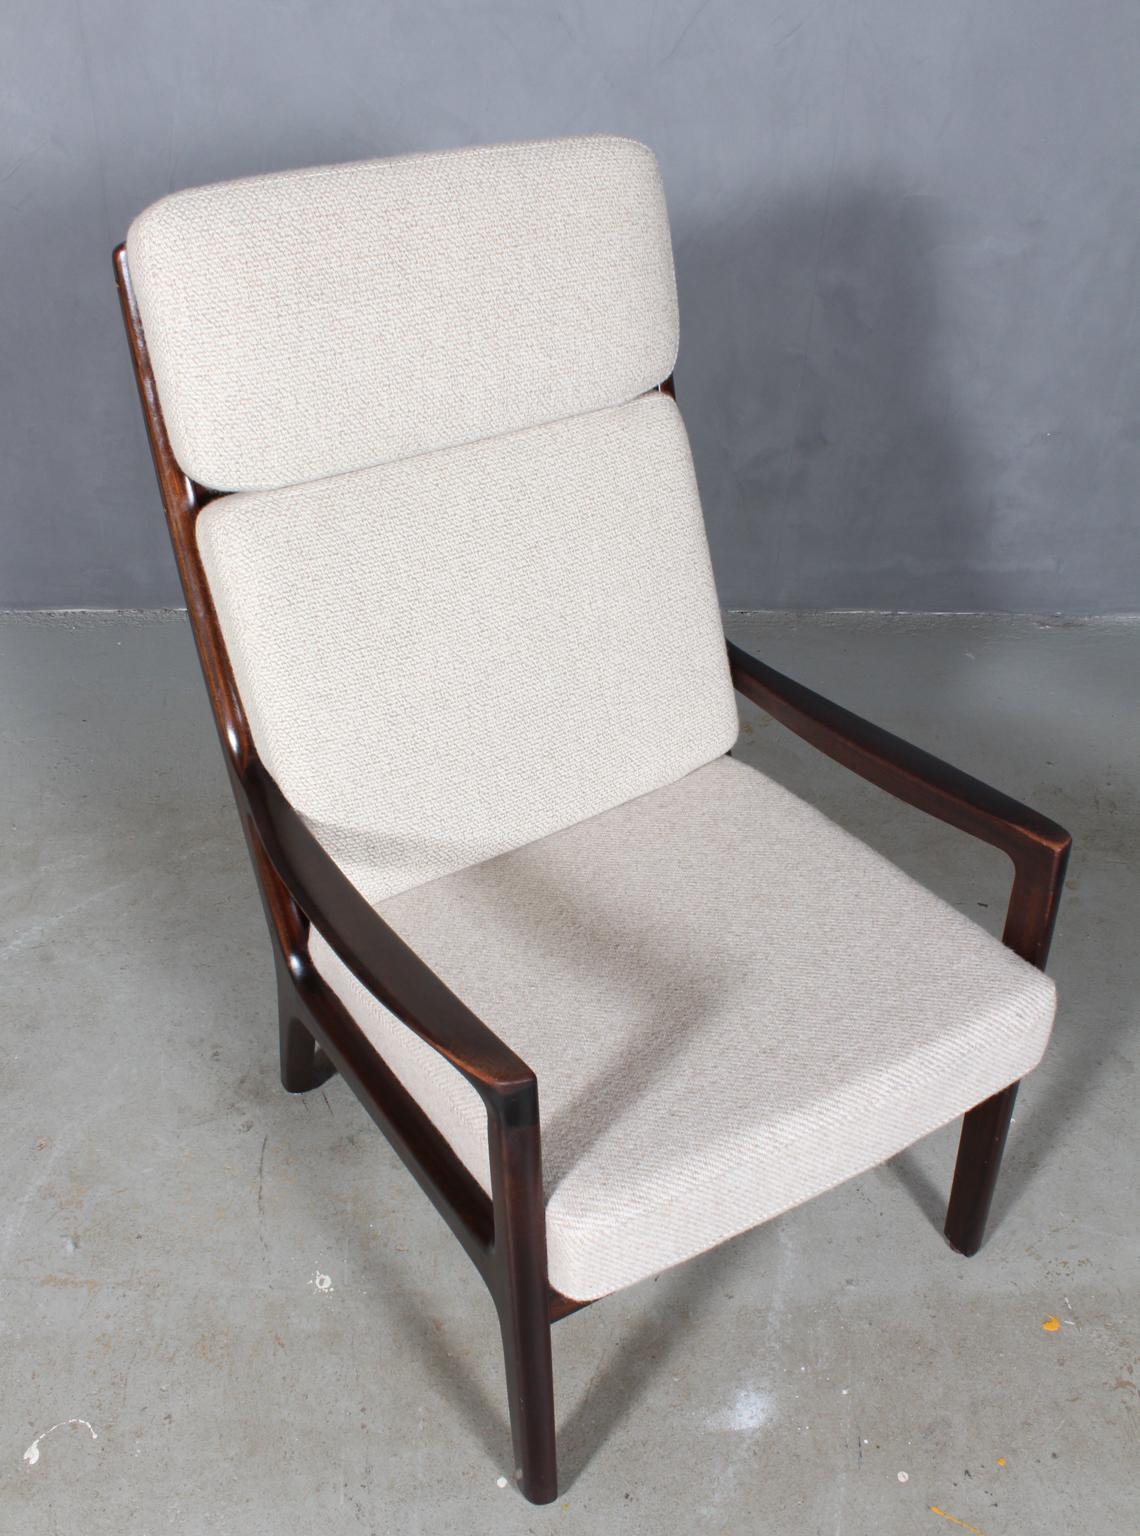 Ole Wanscher lounge upholstered with original light wool.

Made of solid mahogany.

Model senator, made by Cado.